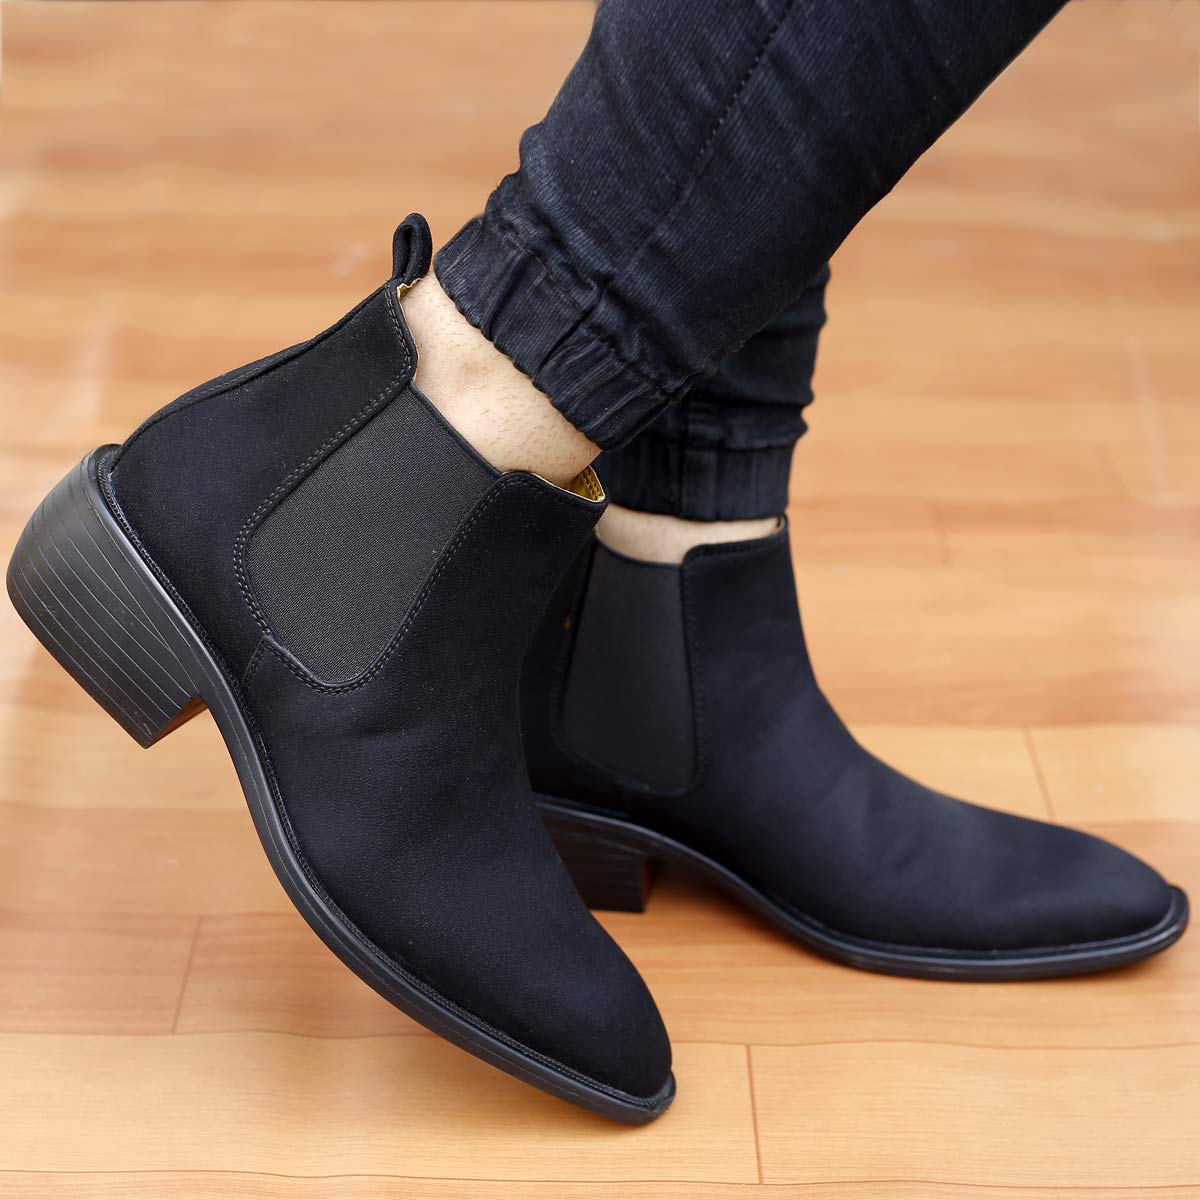 Height Increasing Suede Material Black Casual Chelsea Boots For Men-JonasParamount